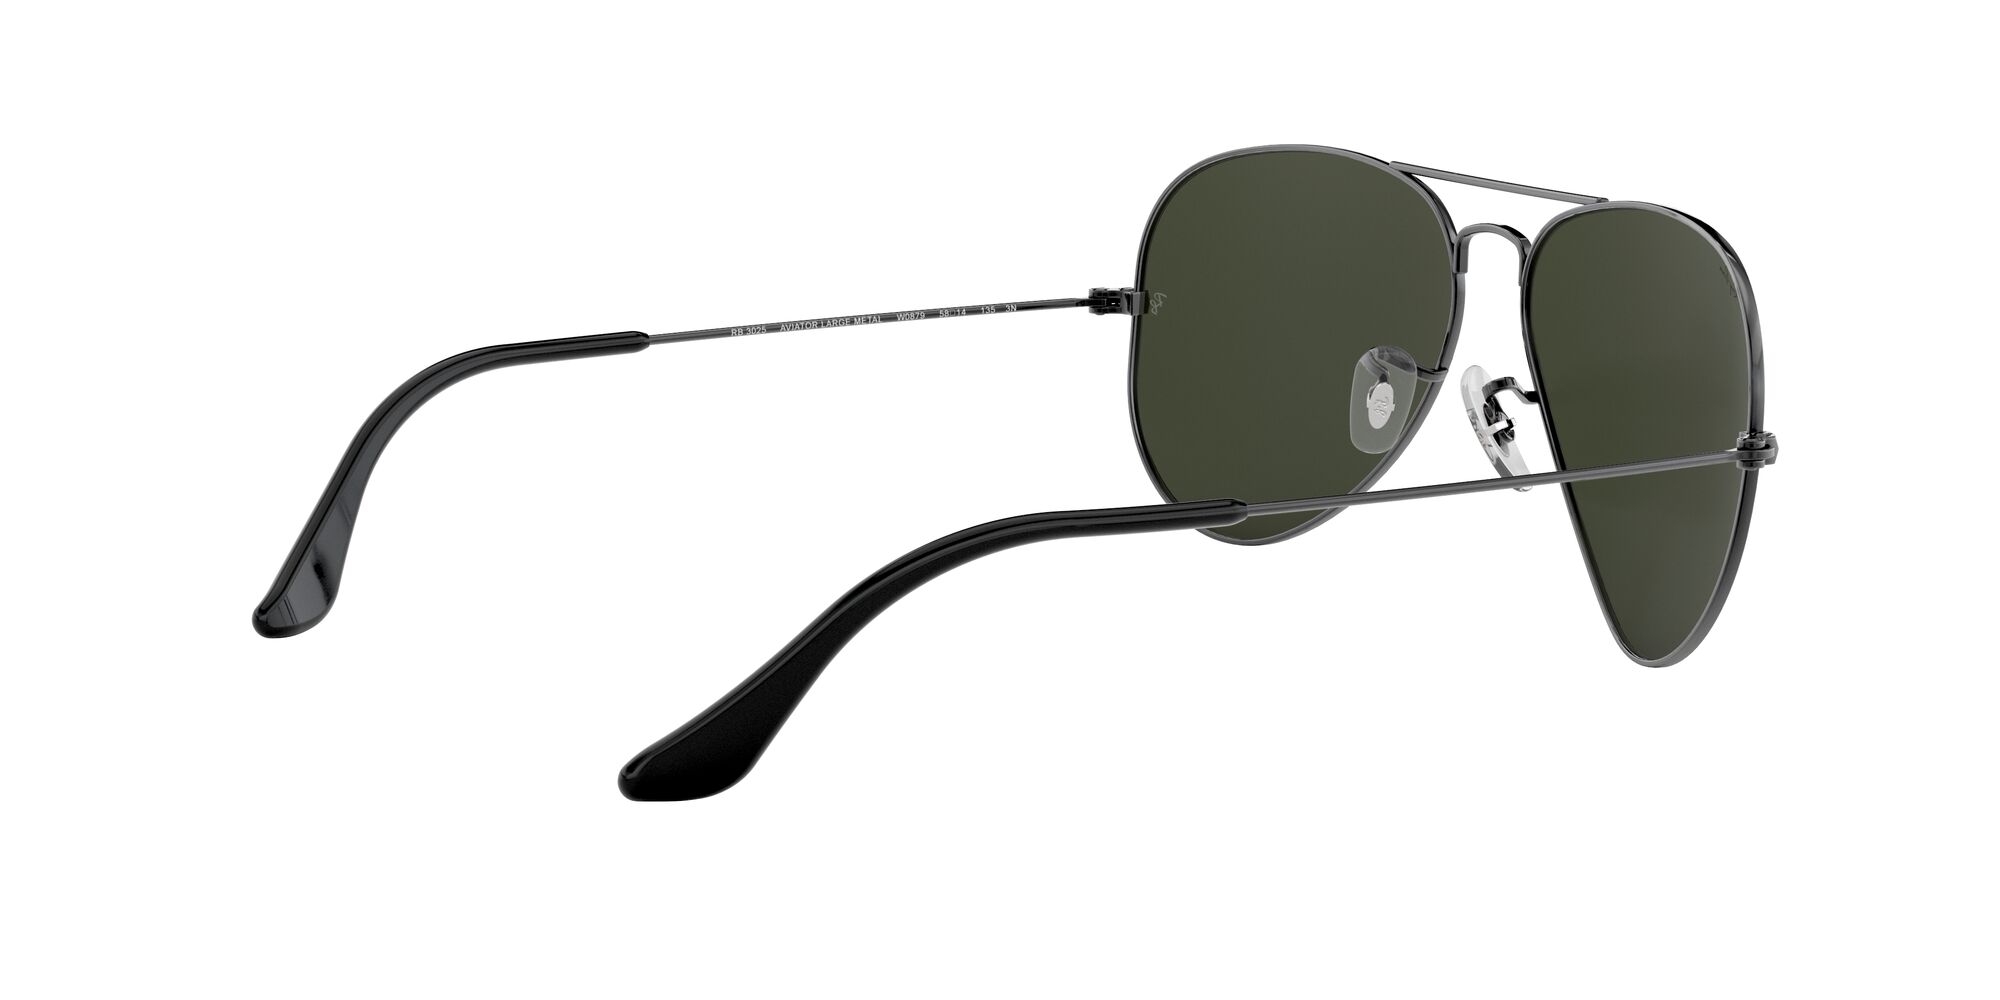 Ray-Ban RB3025 Classic Adult Sunglasses - image 5 of 12